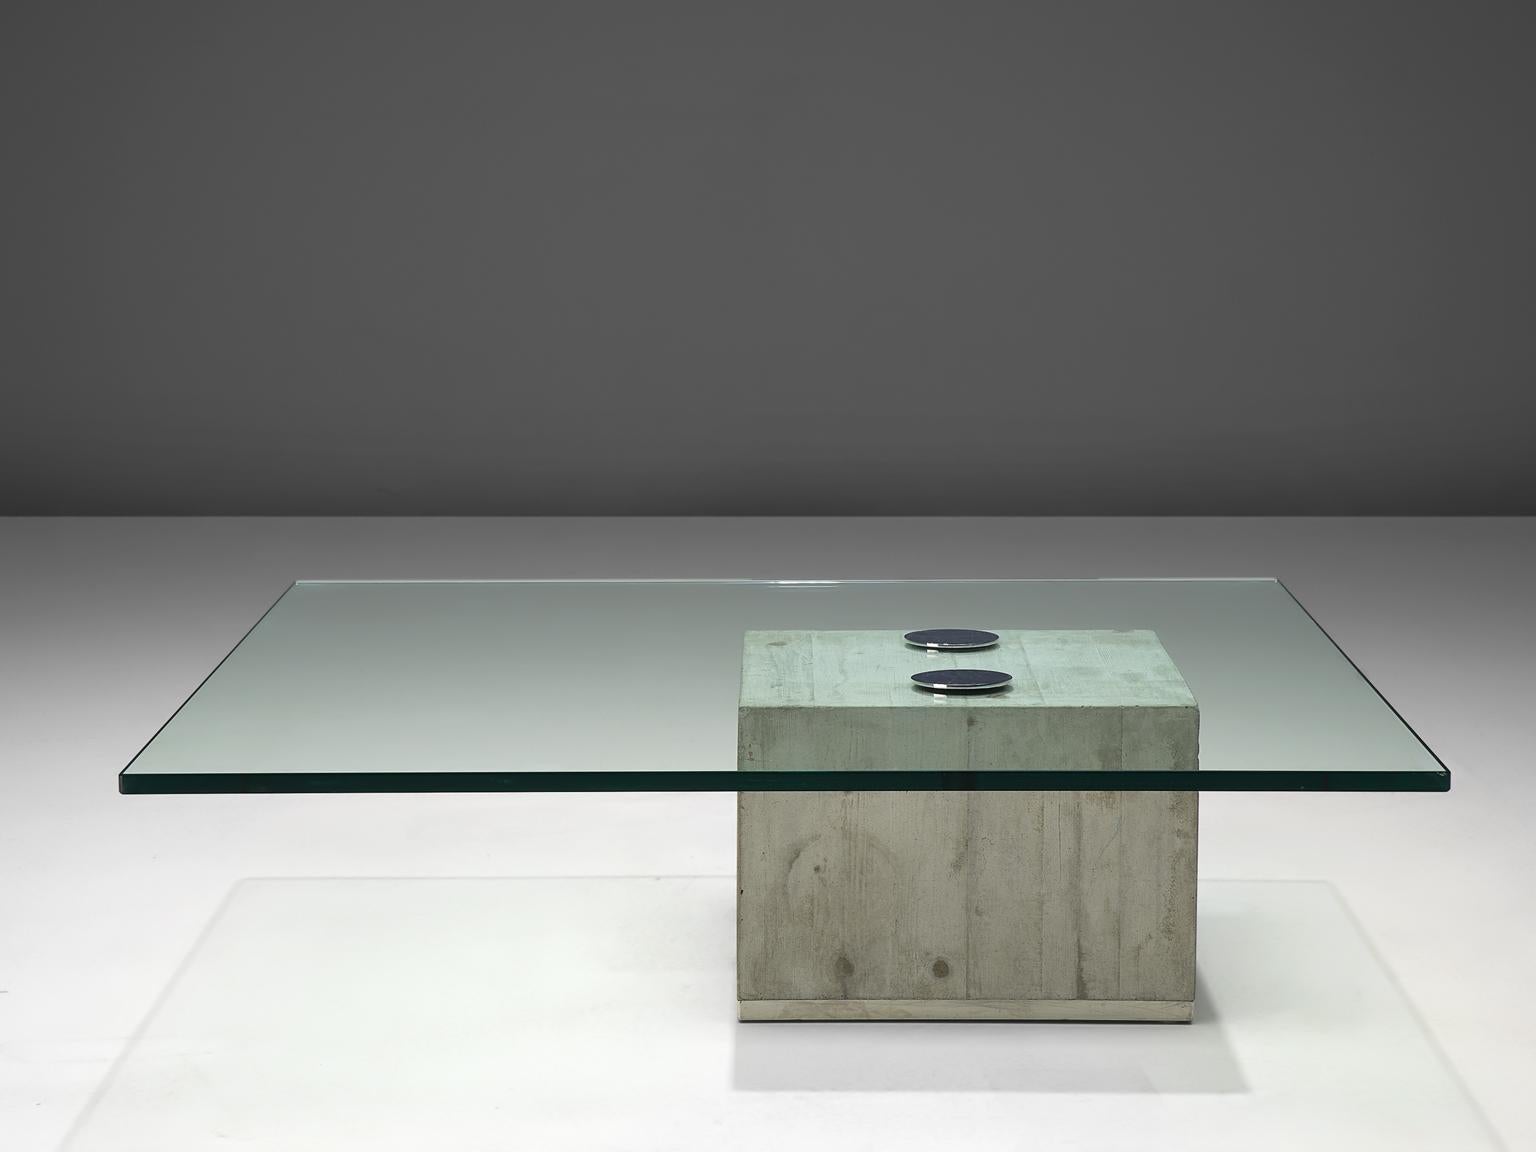 Sergio & Giorgio Saporiti for Saporiti, coffee table, glass, concrete and chromed steel, Italy, 1972.

Modern, sculptural coffee table designed by Sergio and Giorgio Saporiti. This table called model Sapo is made of a solid concrete base with a